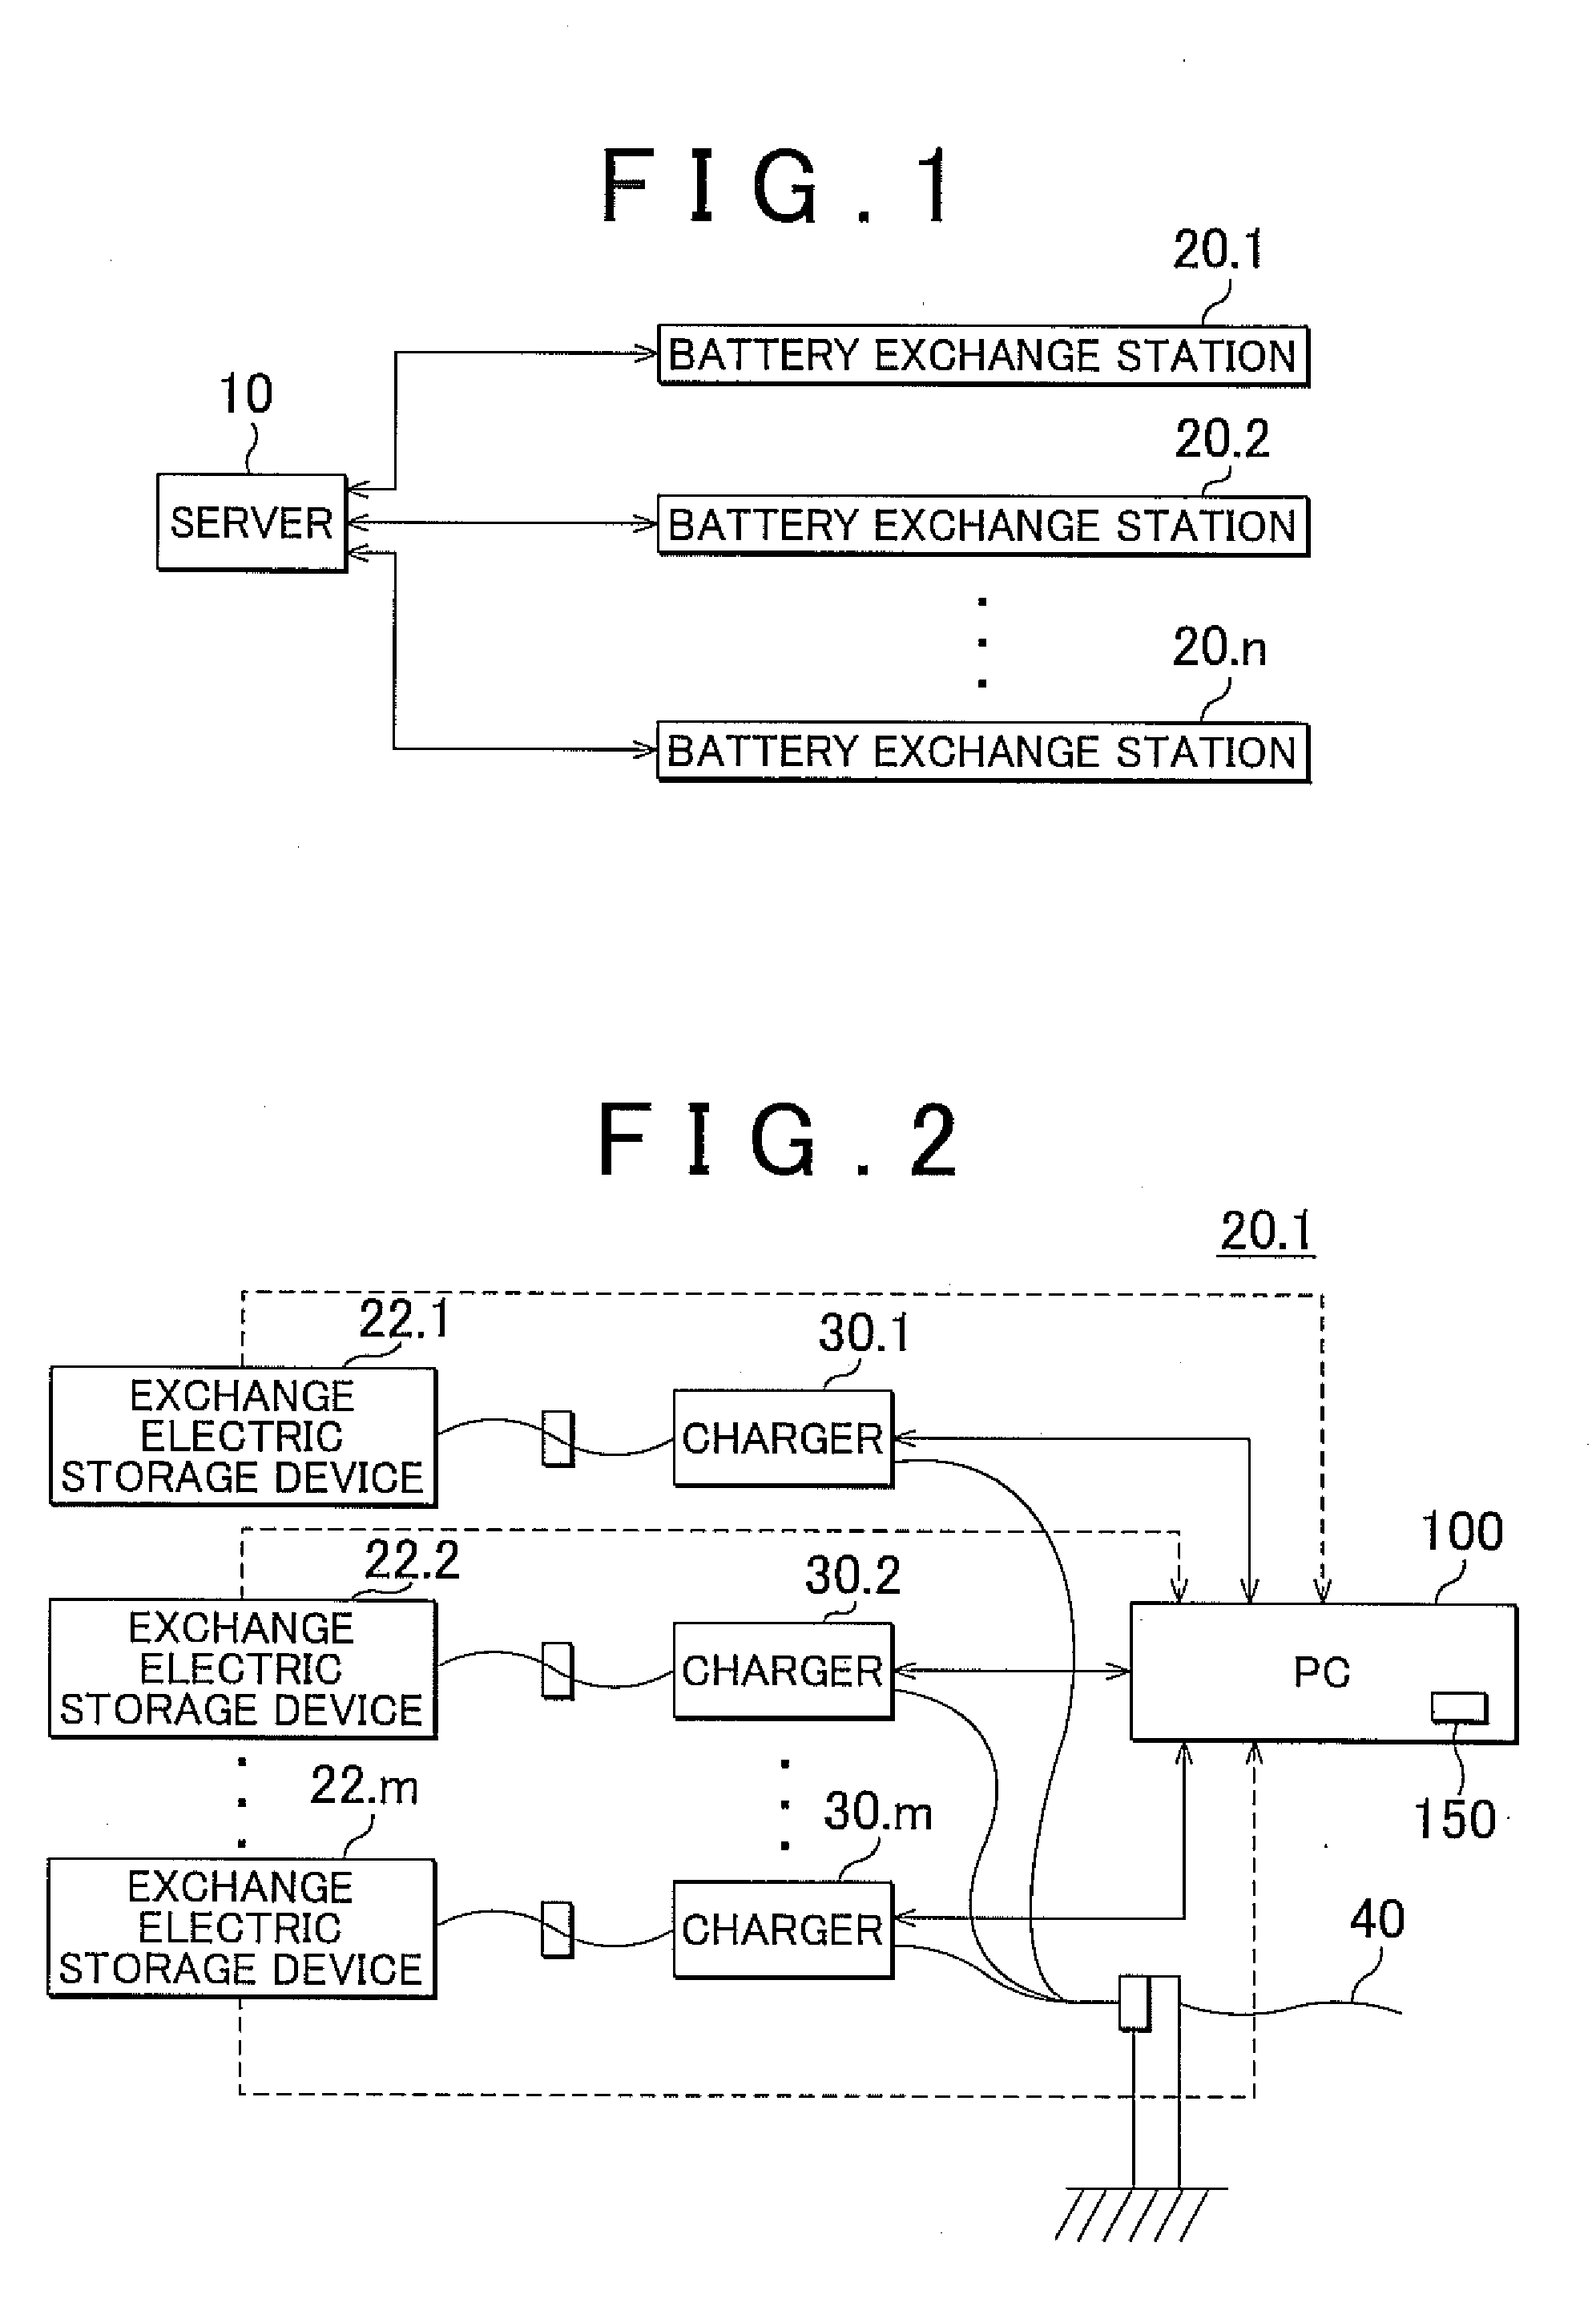 Management system for exchange electric storage devices and management method for exchange electric storage devices